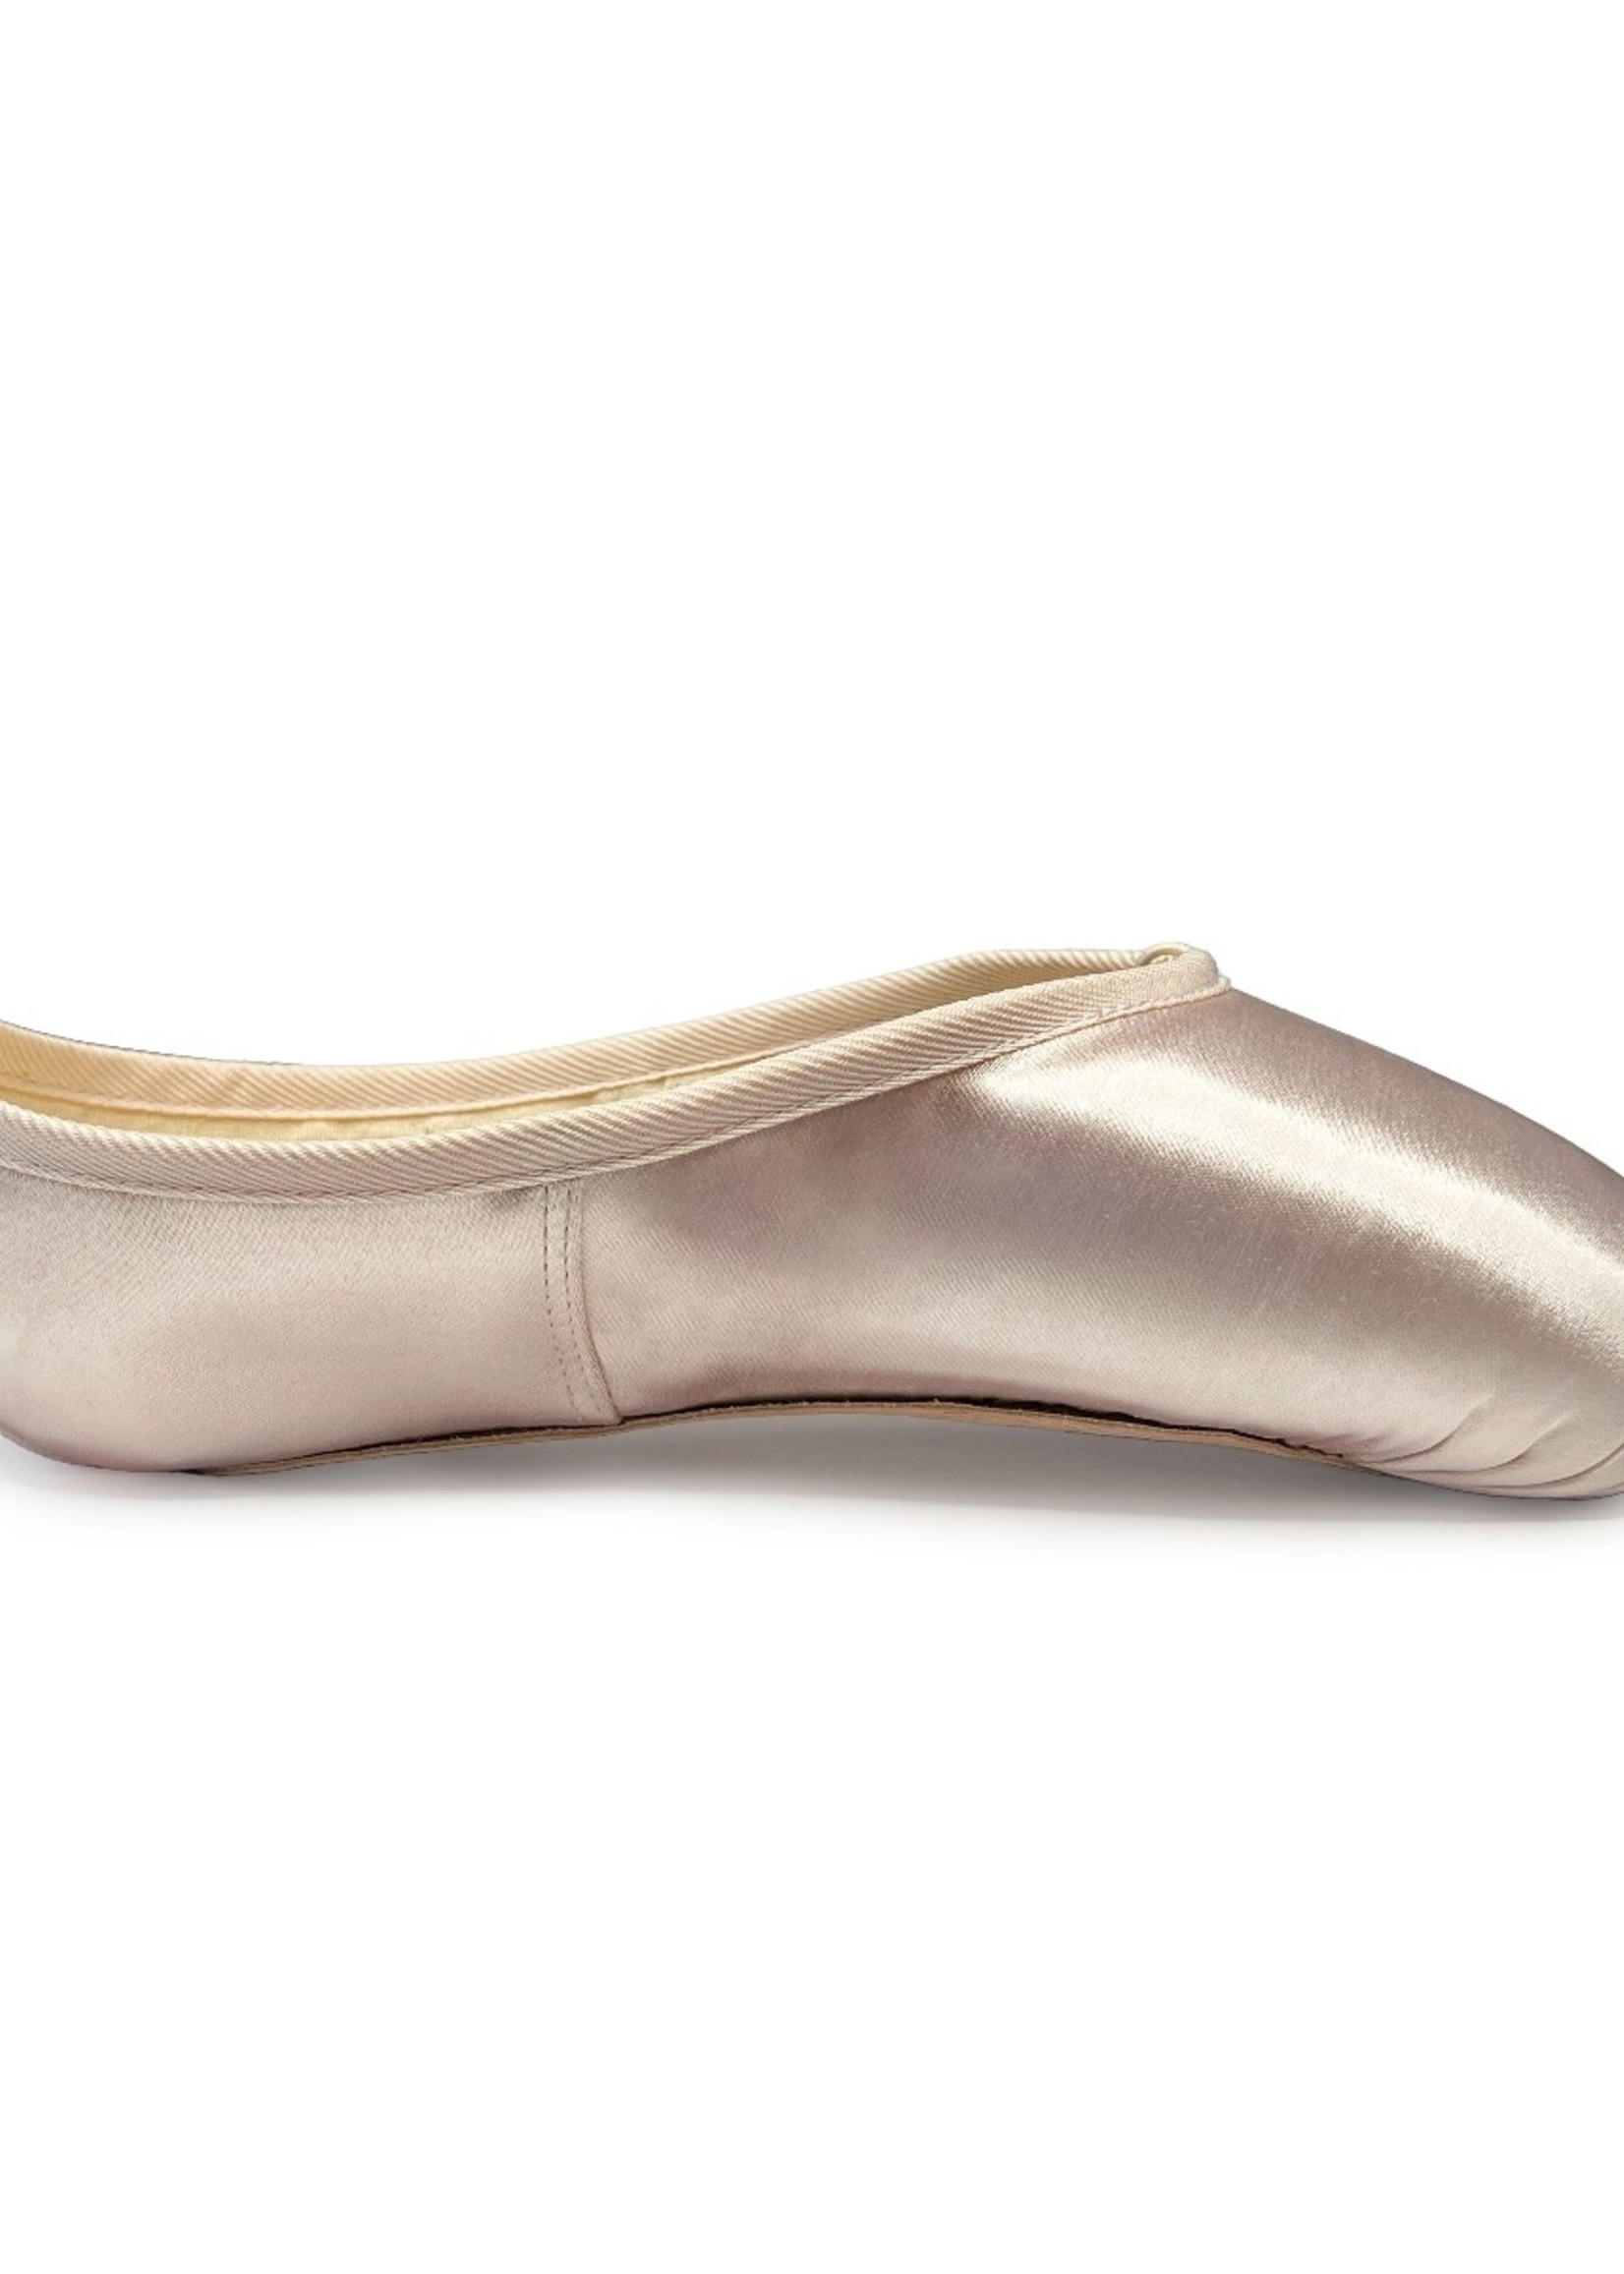 RP Collection Russian Pointe Baroque Satin Pointe Shoe